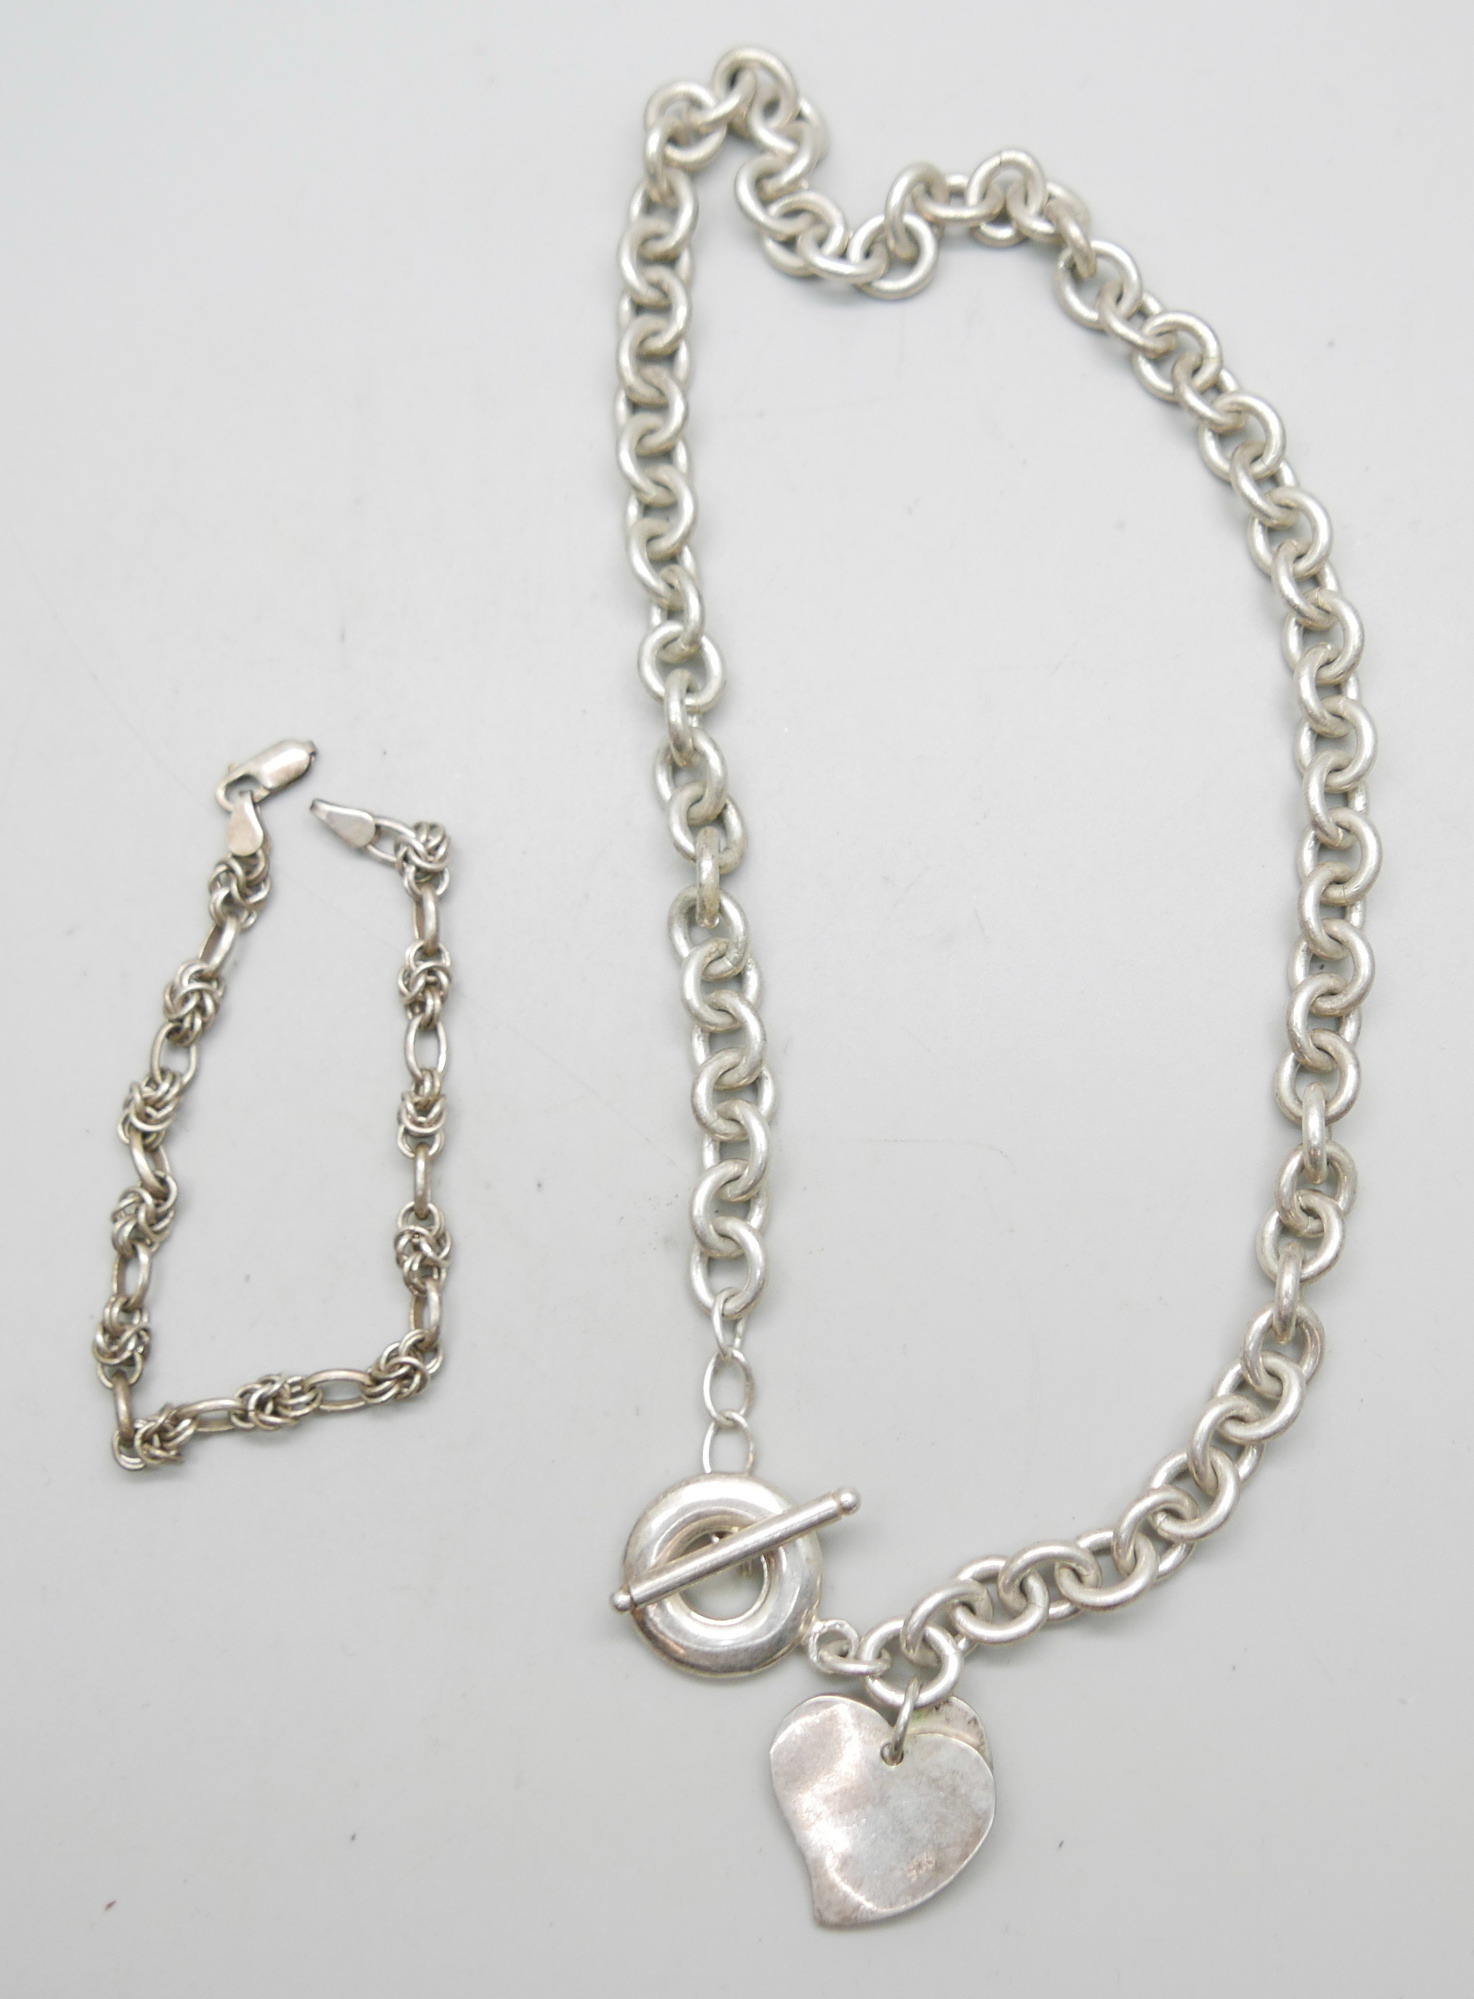 A silver heart, T-bar necklace and a silver bracelet, 77g - Image 4 of 4